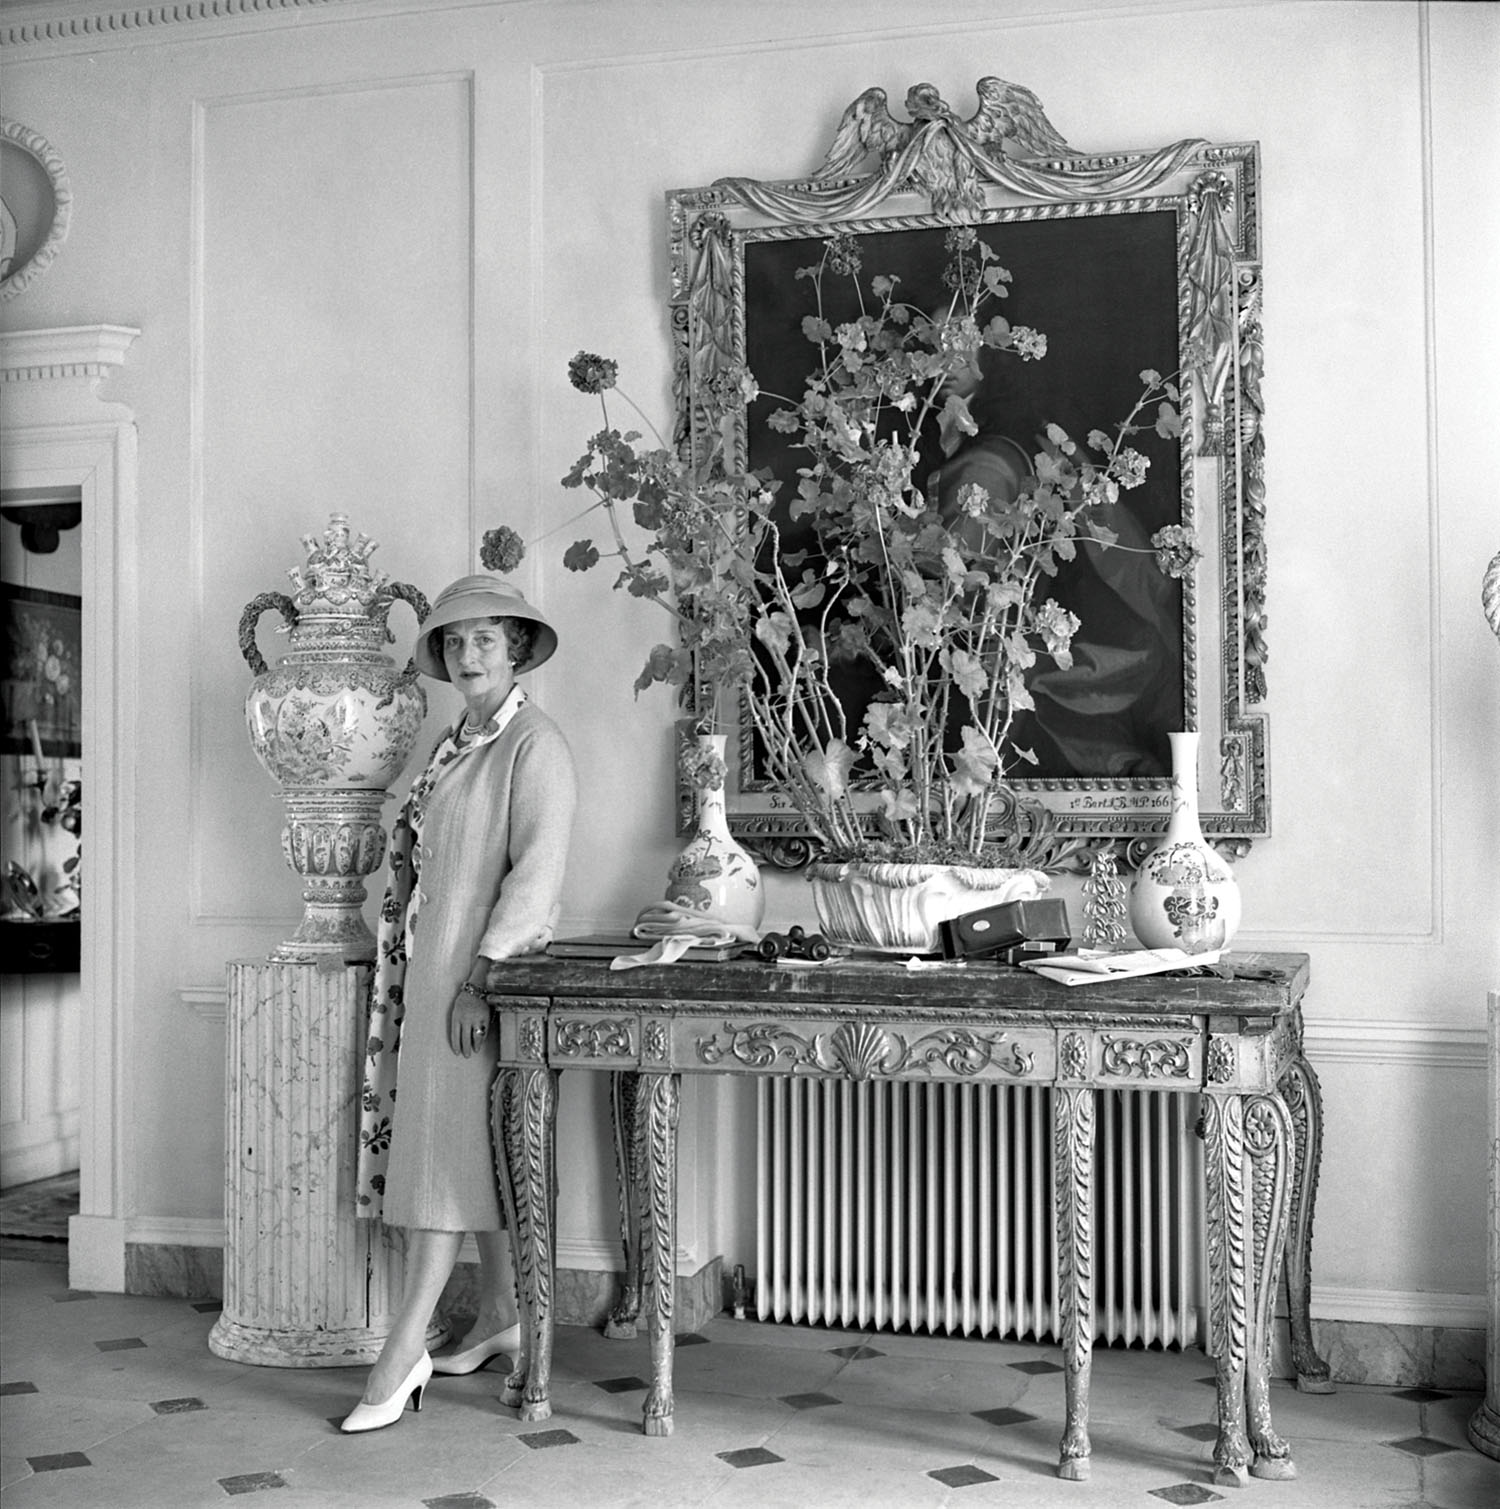 Nancy Lancaster in the entry hall of Haseley Court photographed by Sir Cecil Beaton, source https://flowermag.com/NANCY-LANCASTER-DITCHLEY-HASELEY-KELMARSH/